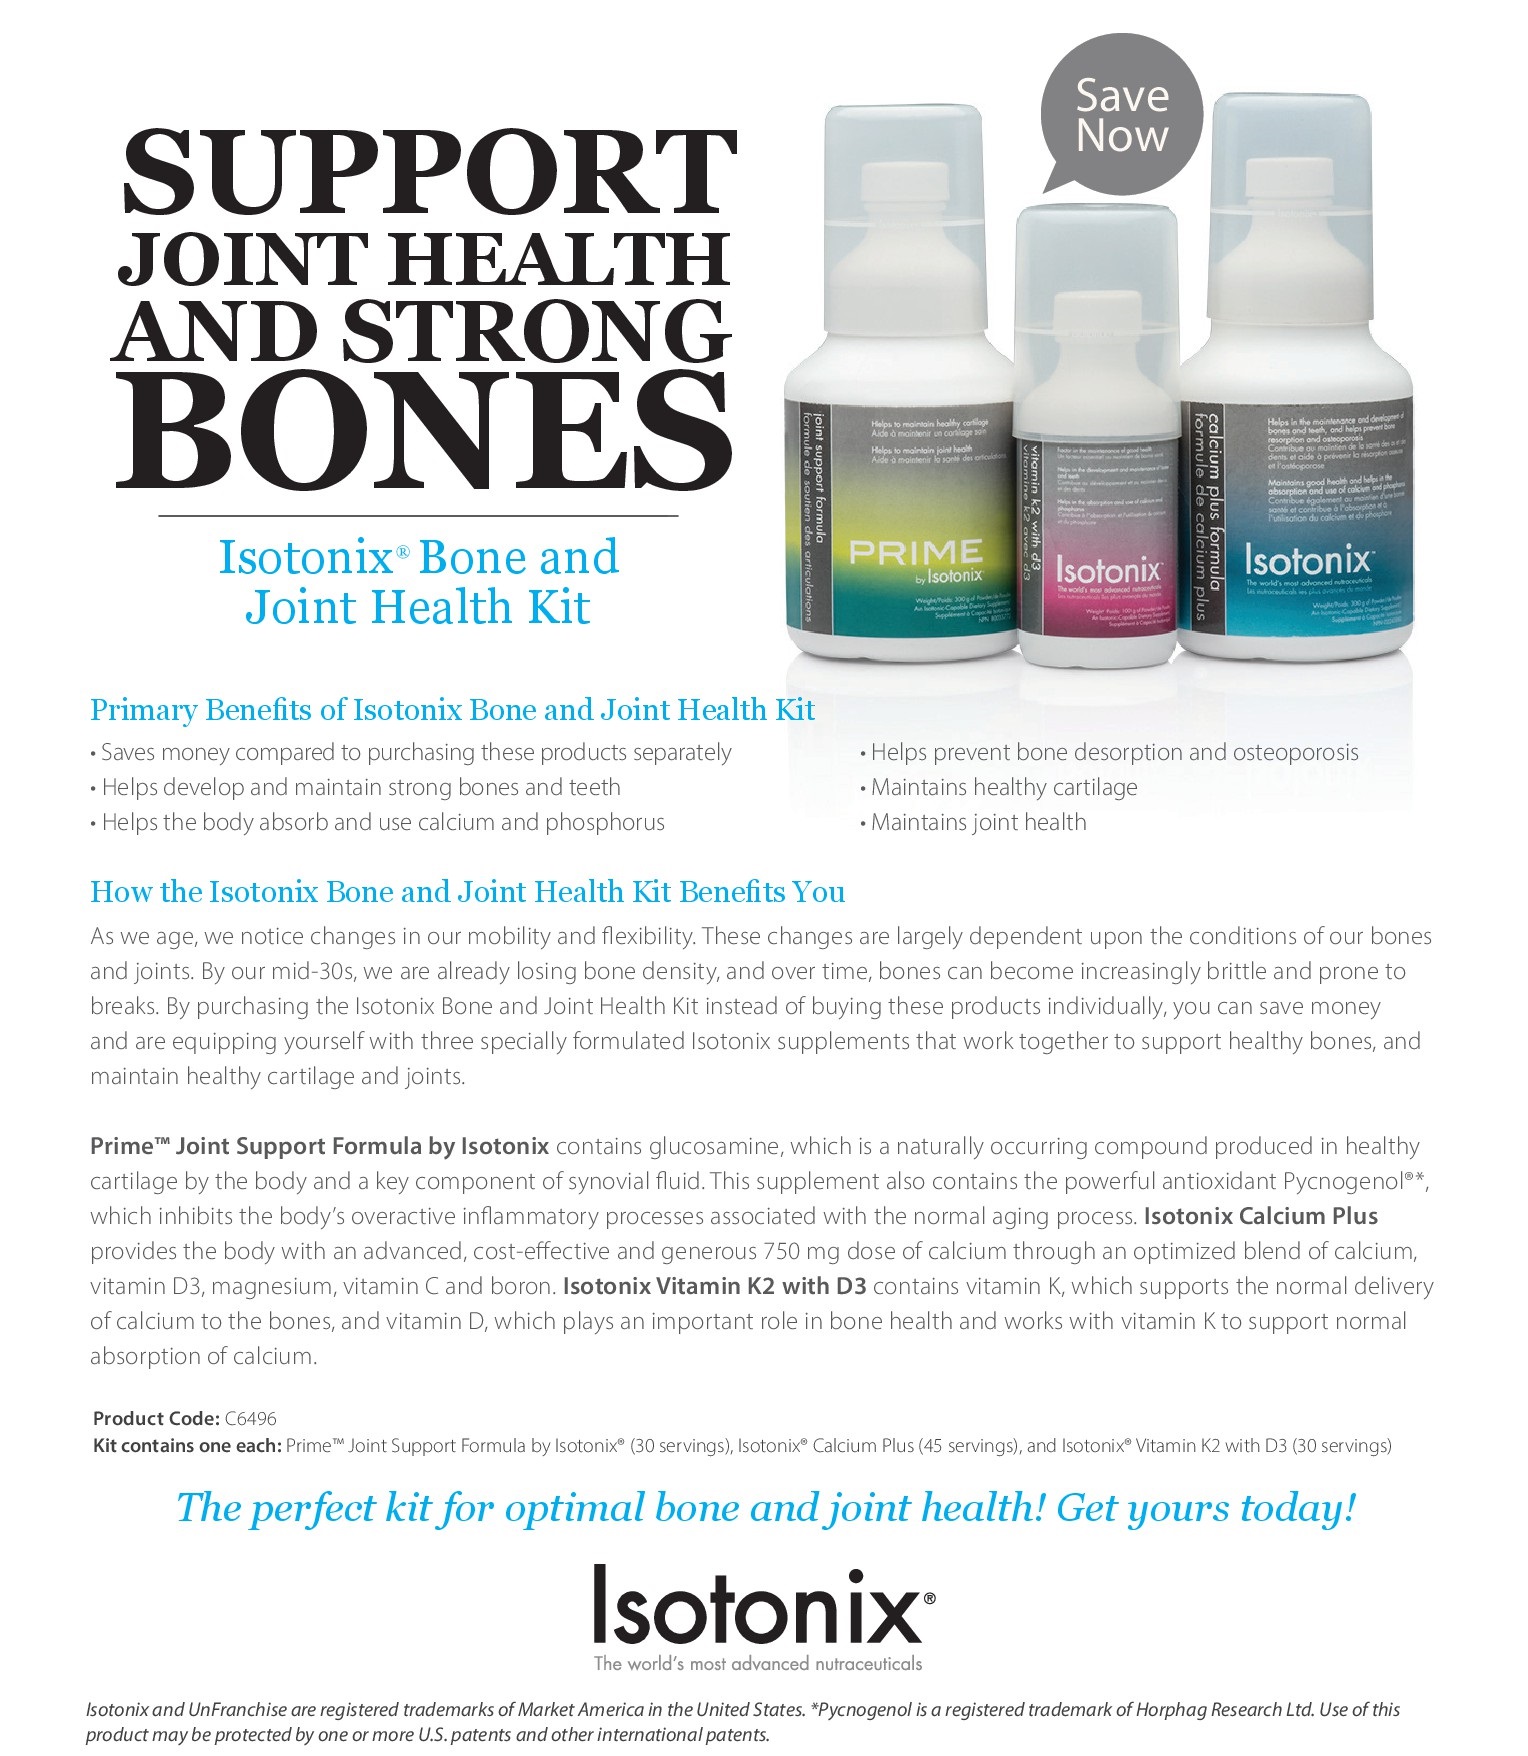 Why you should buy the Isotonix Bone & Joint Health Kit?